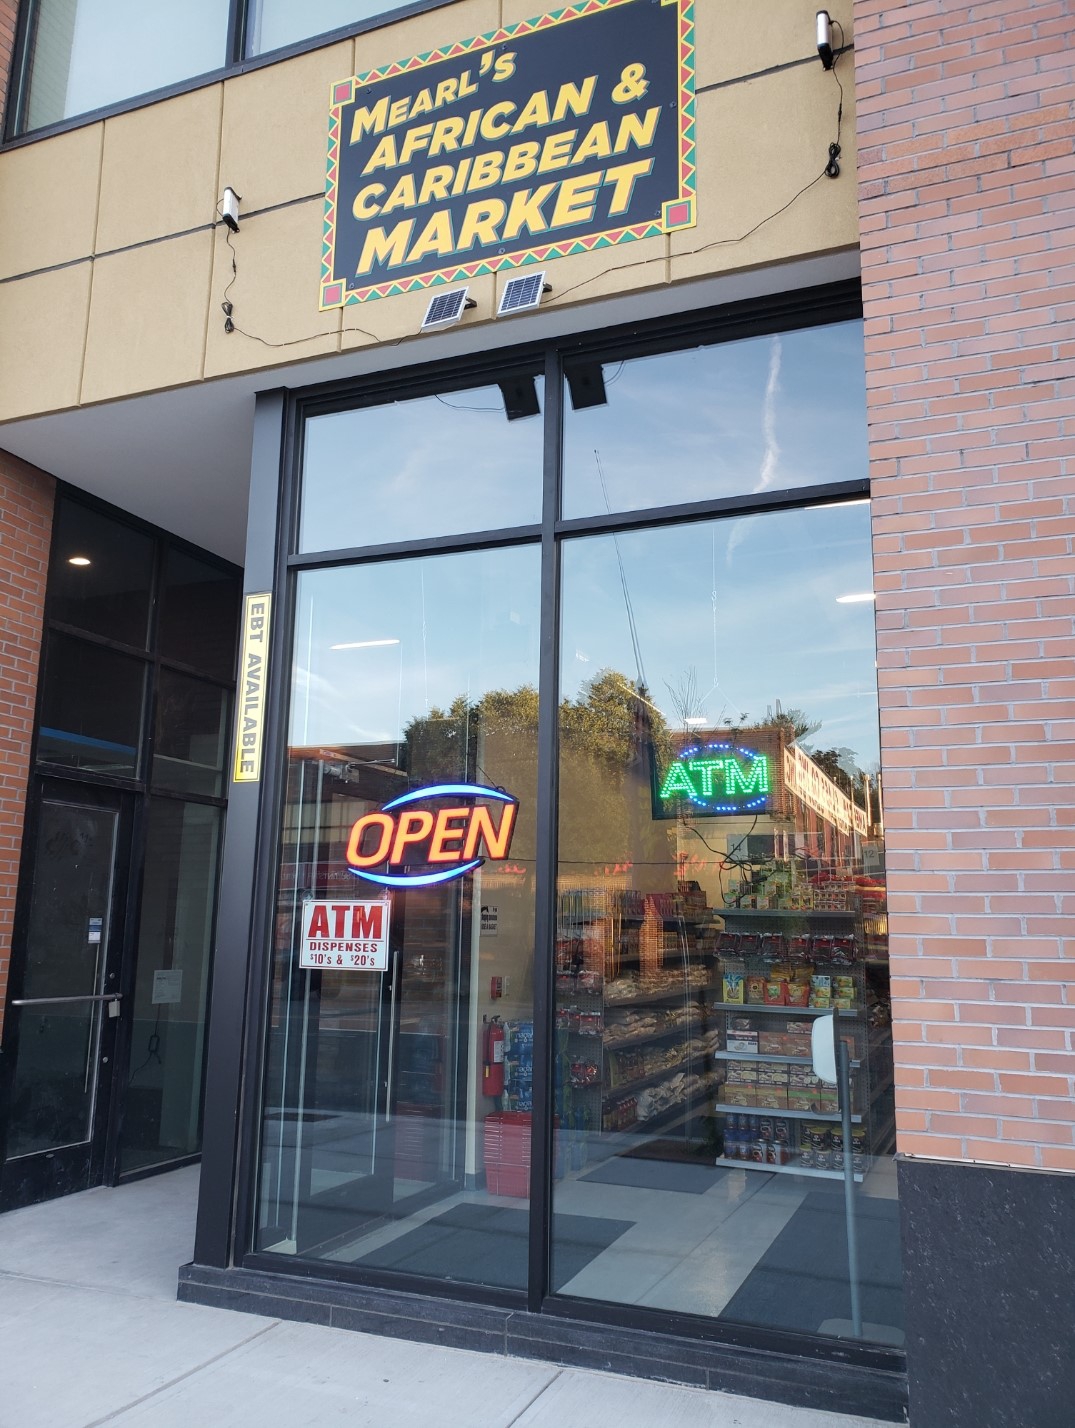 Mearl's African & Caribbean market